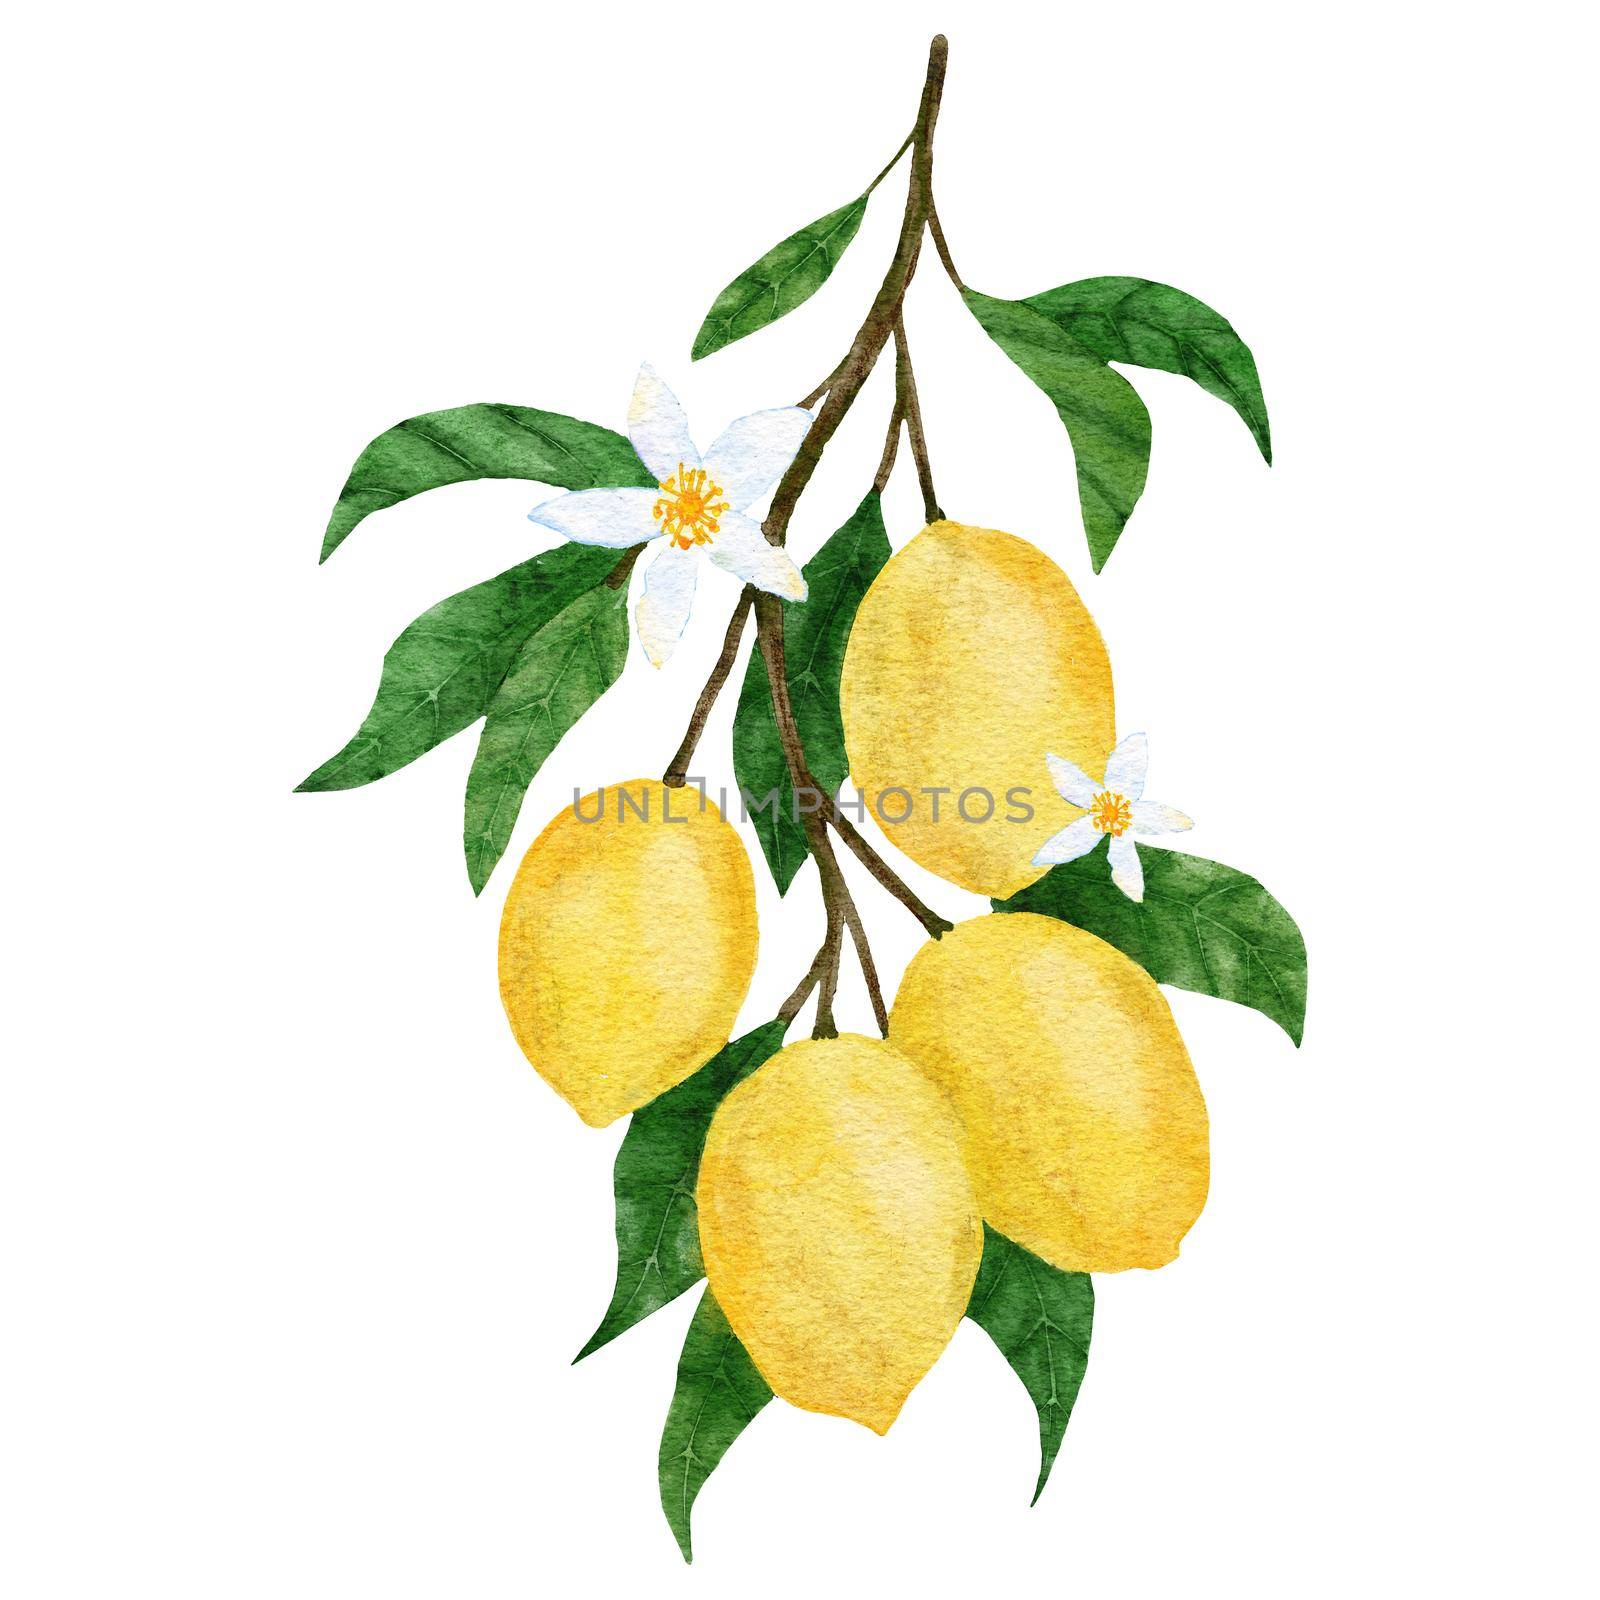 Watercolor hand drawn illustration with yellow ripe mediterranean lemons and green elegant leaves. Summer fruit citrus clipart for wedding cards invitations, nature design . by Lagmar